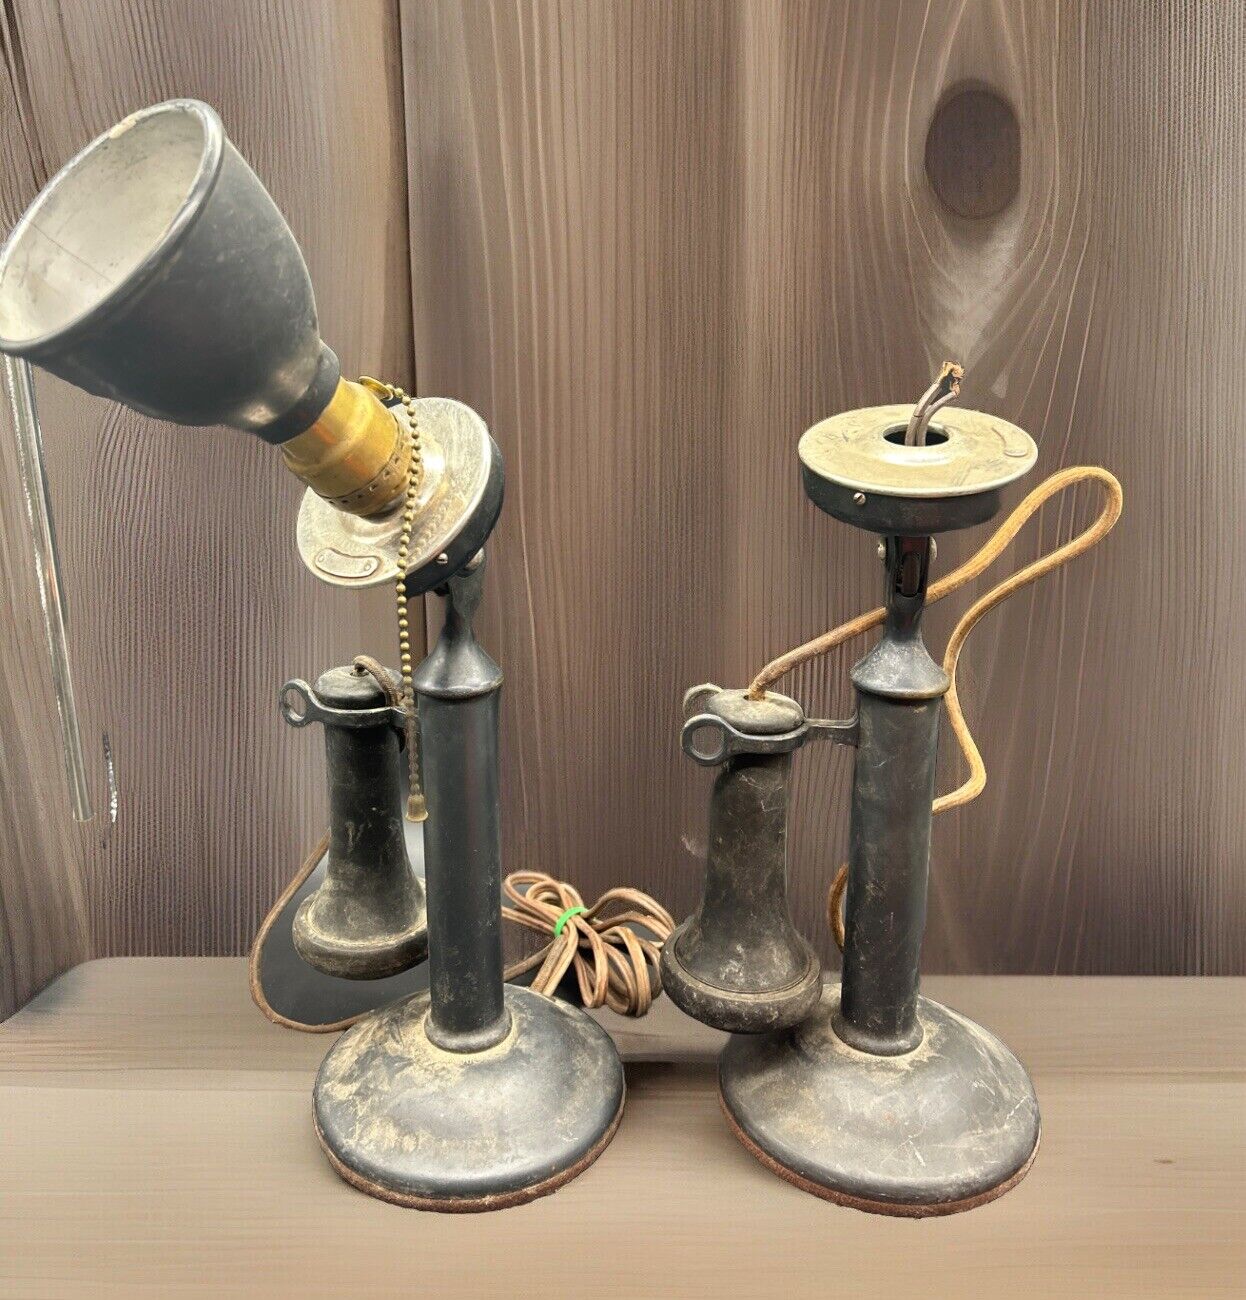 Lot 2 Antique Candle Stick Telephones Parts Repair Western Electric 353W Brass